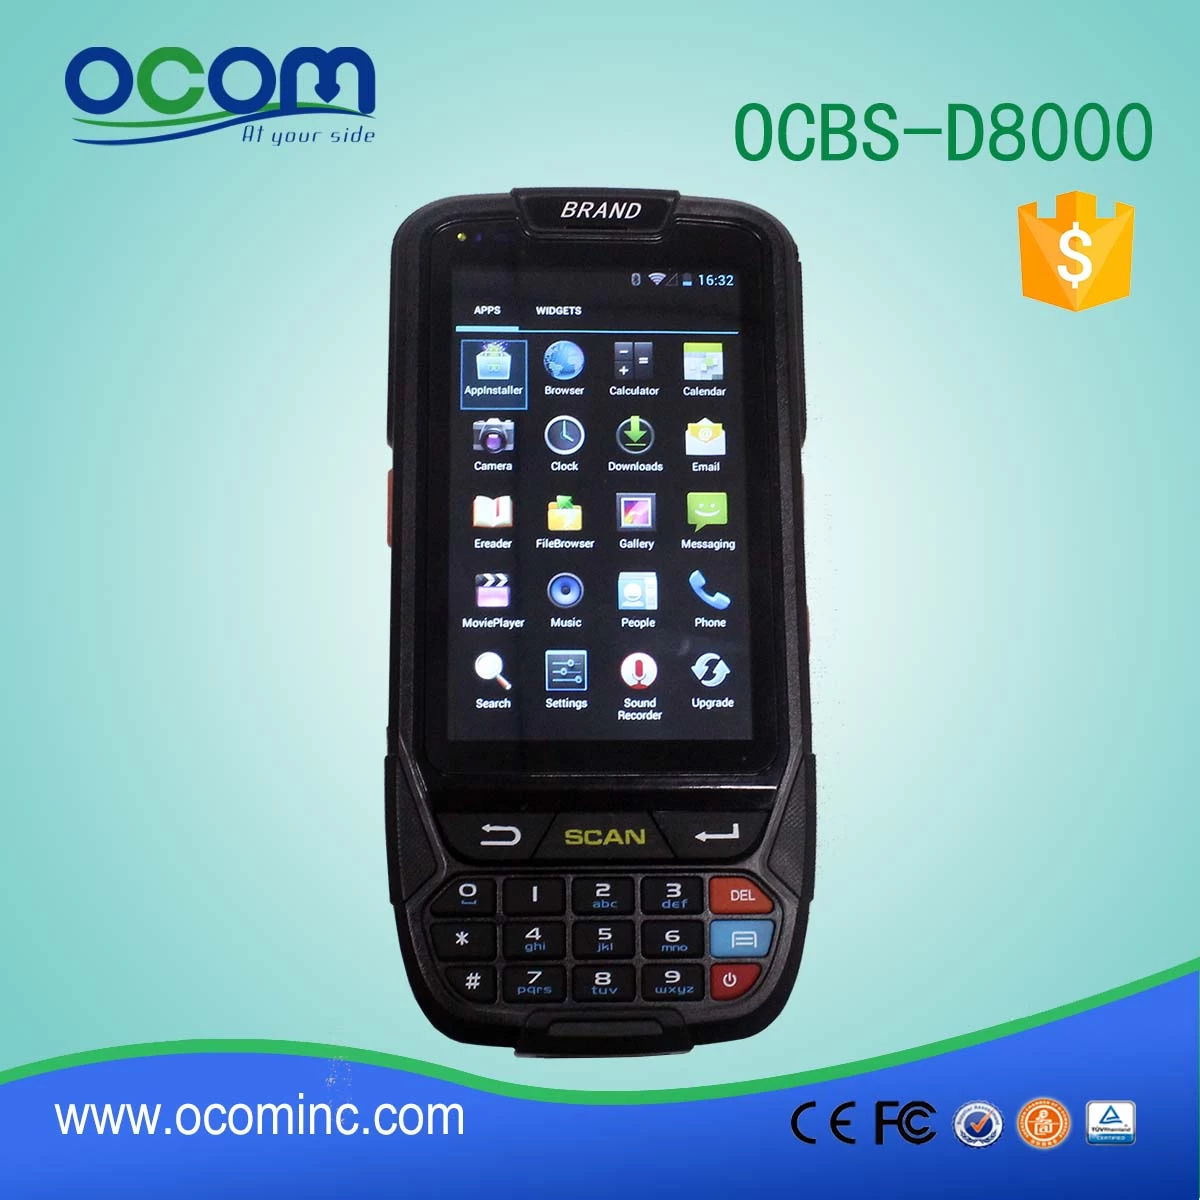 OCBS-D8000 android pda barcode laser scanner